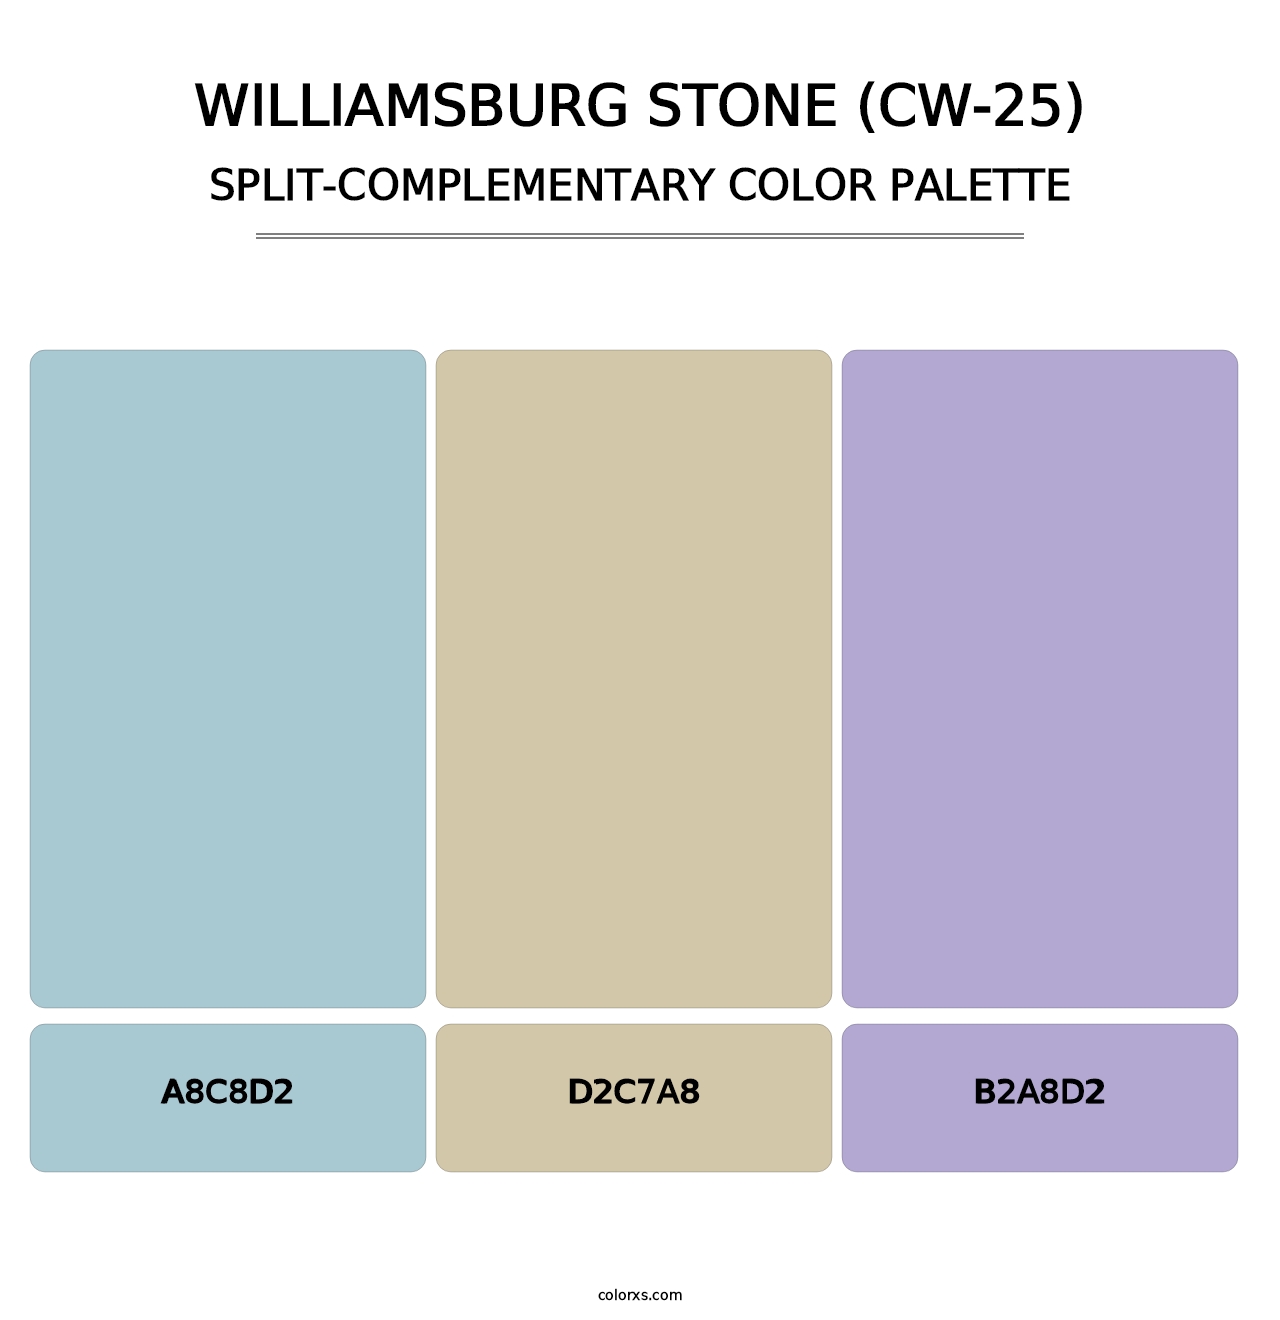 Williamsburg Stone (CW-25) - Split-Complementary Color Palette